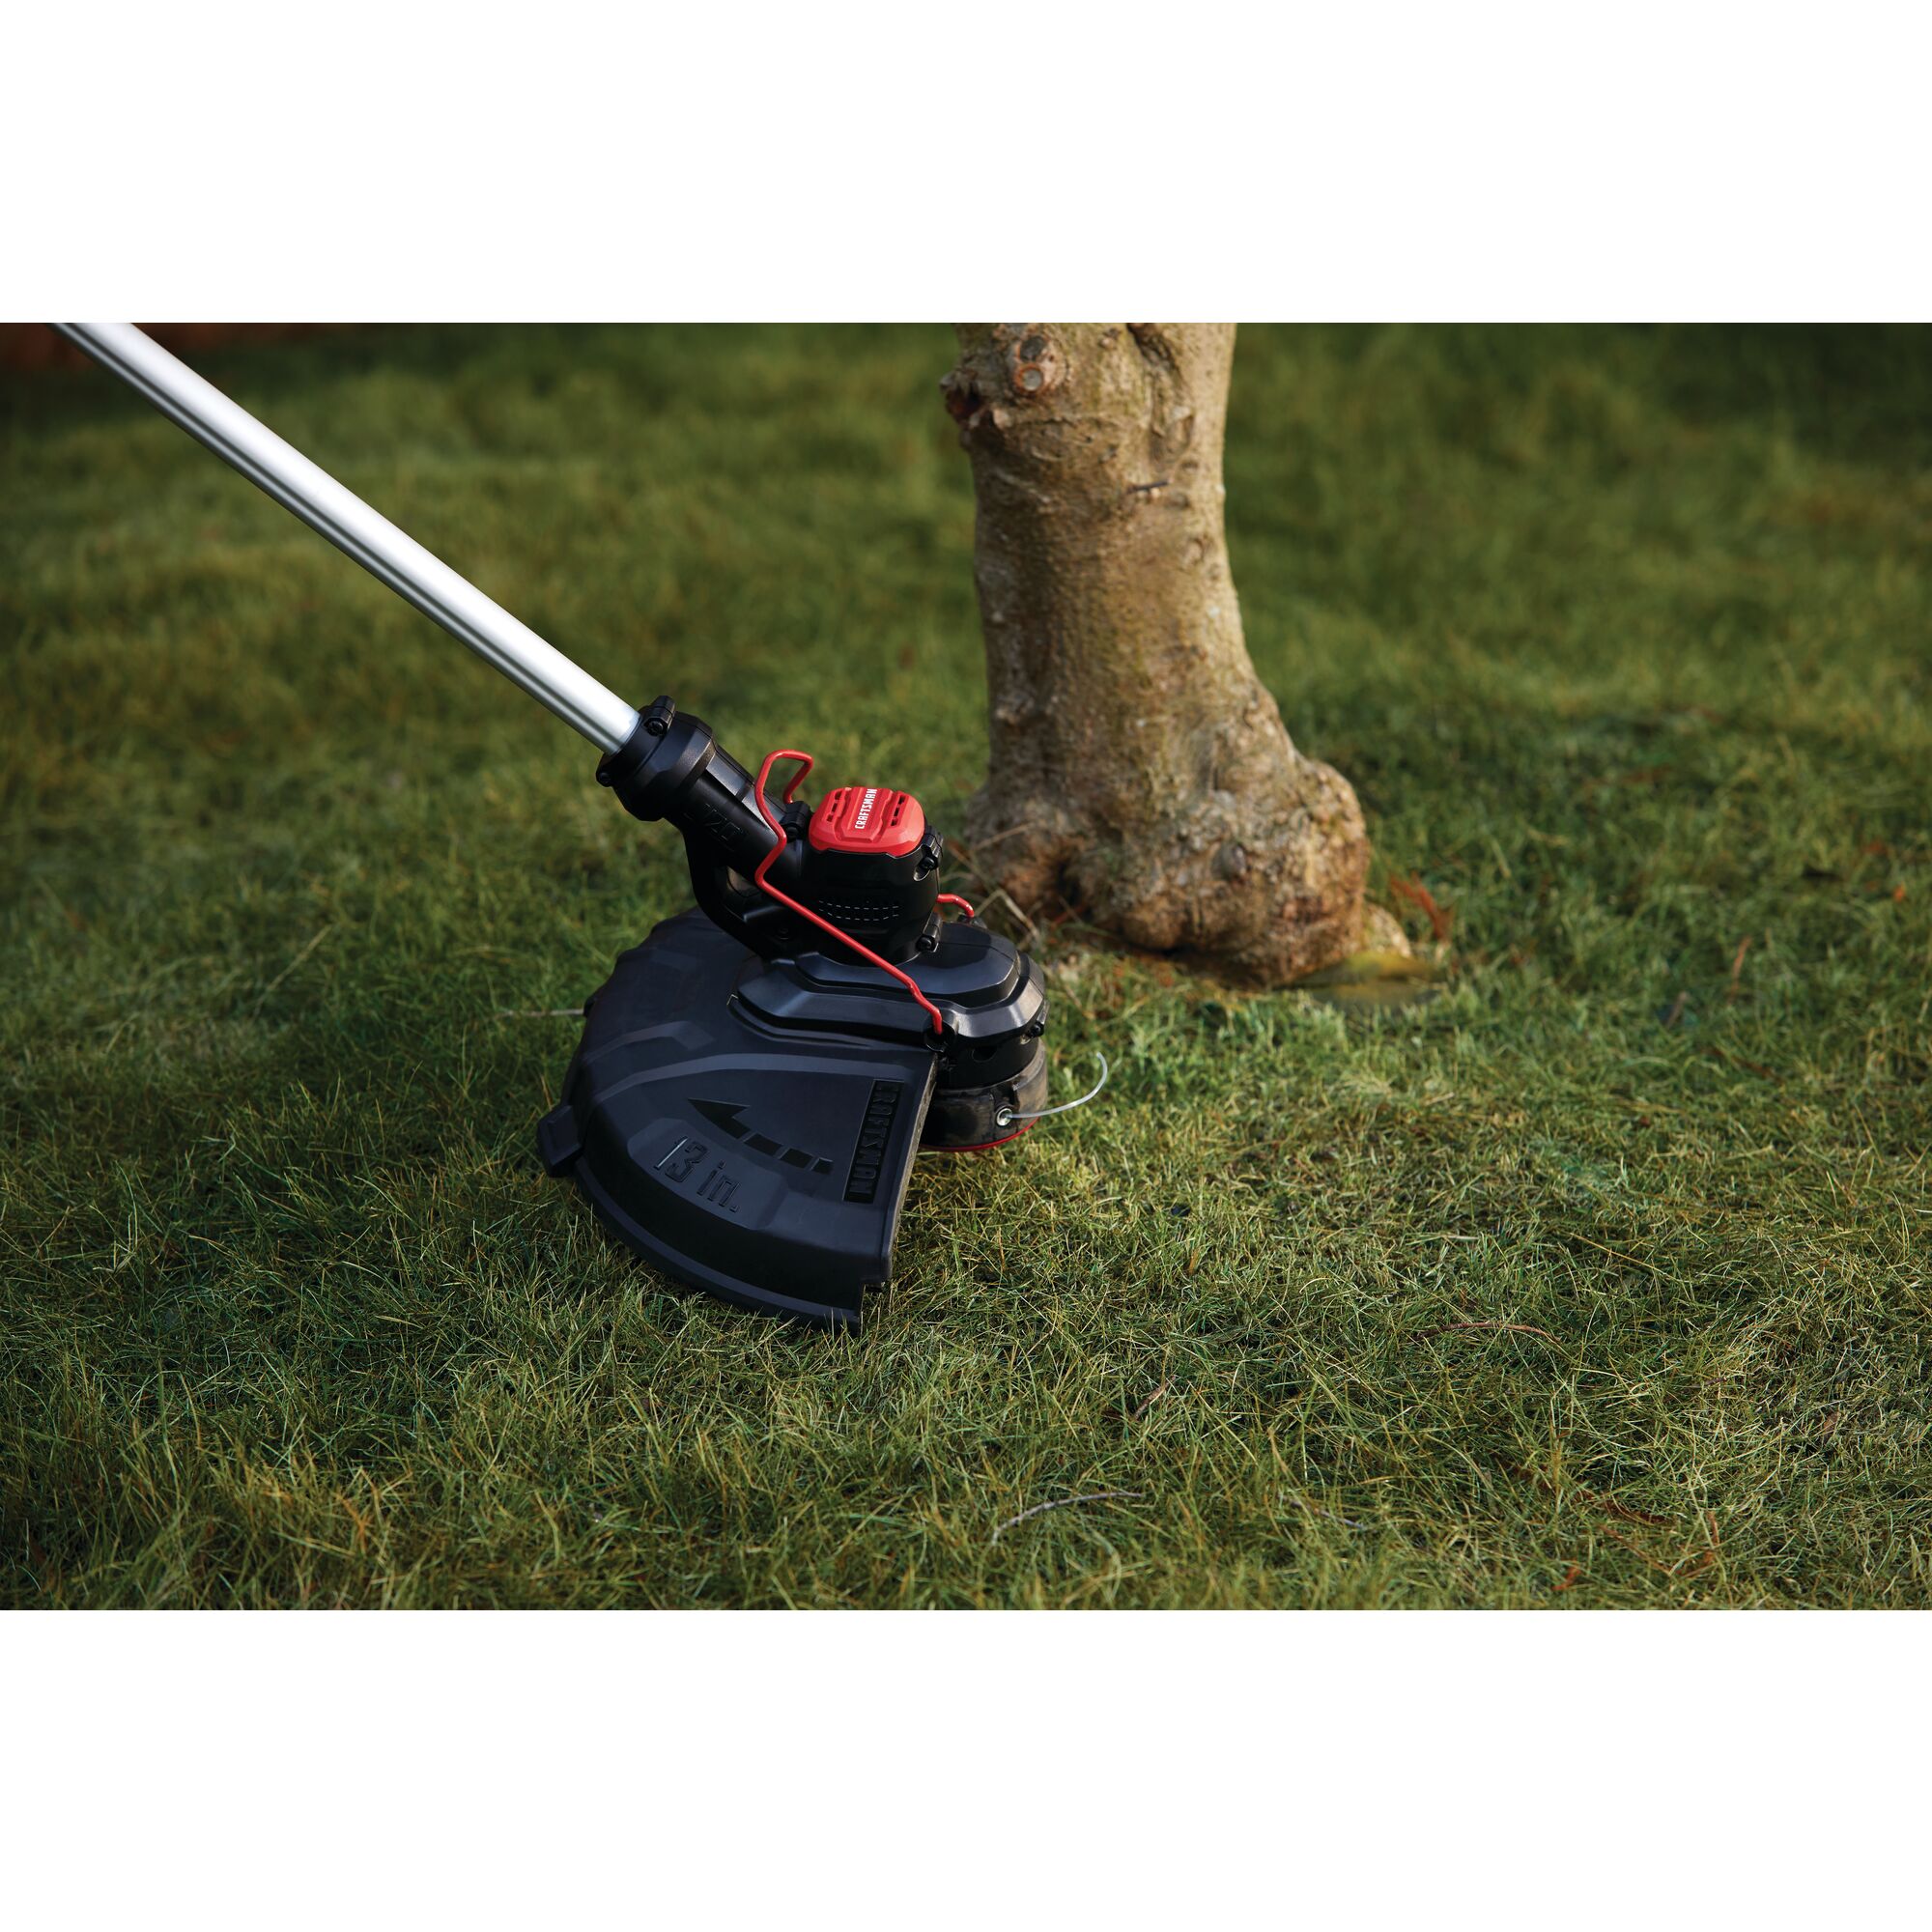 13 inch cutting swath feature of 20 volt weedwacker 13 inch cordless string trimmer and edger with automatic feed kit.